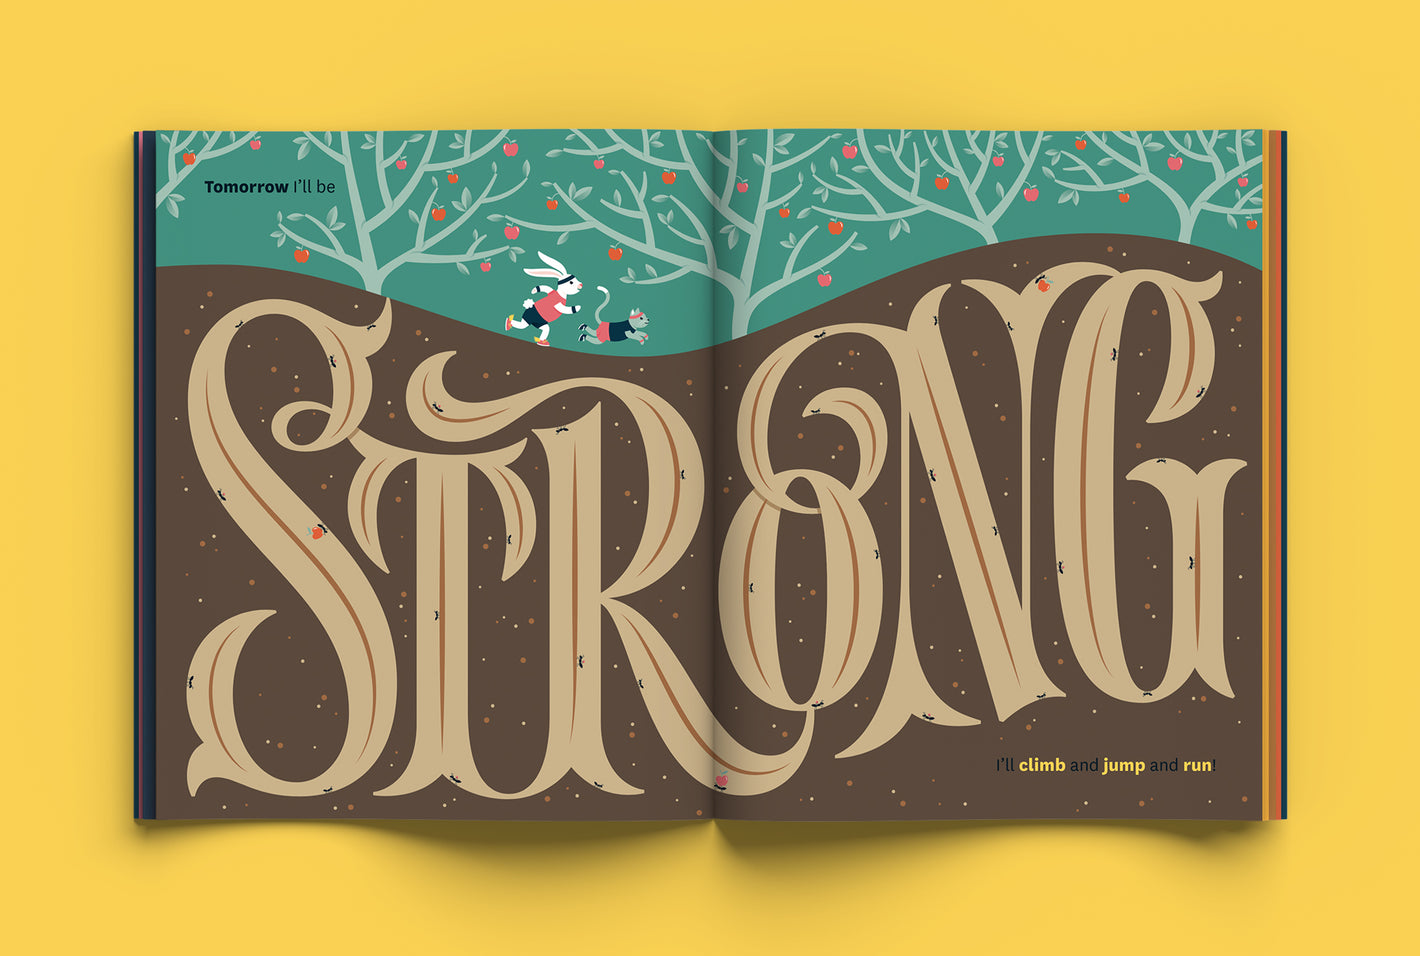 Lettering illustration from Tomorrow I’ll be Brave depicting animal characters running above the word "Strong" which is rendered as an underground ant colony.